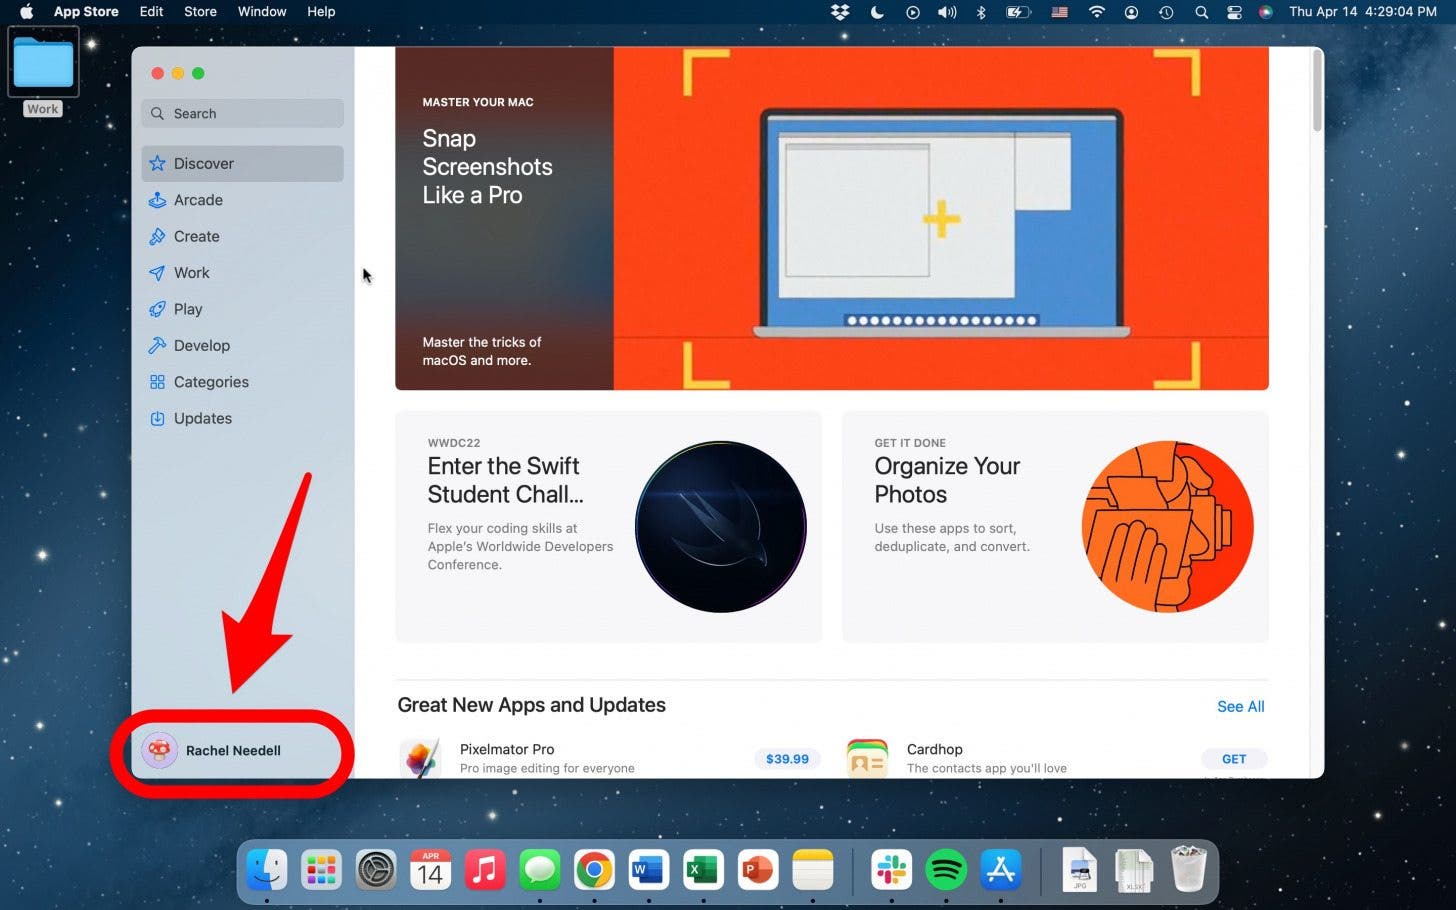 open app store on mac to get a refund